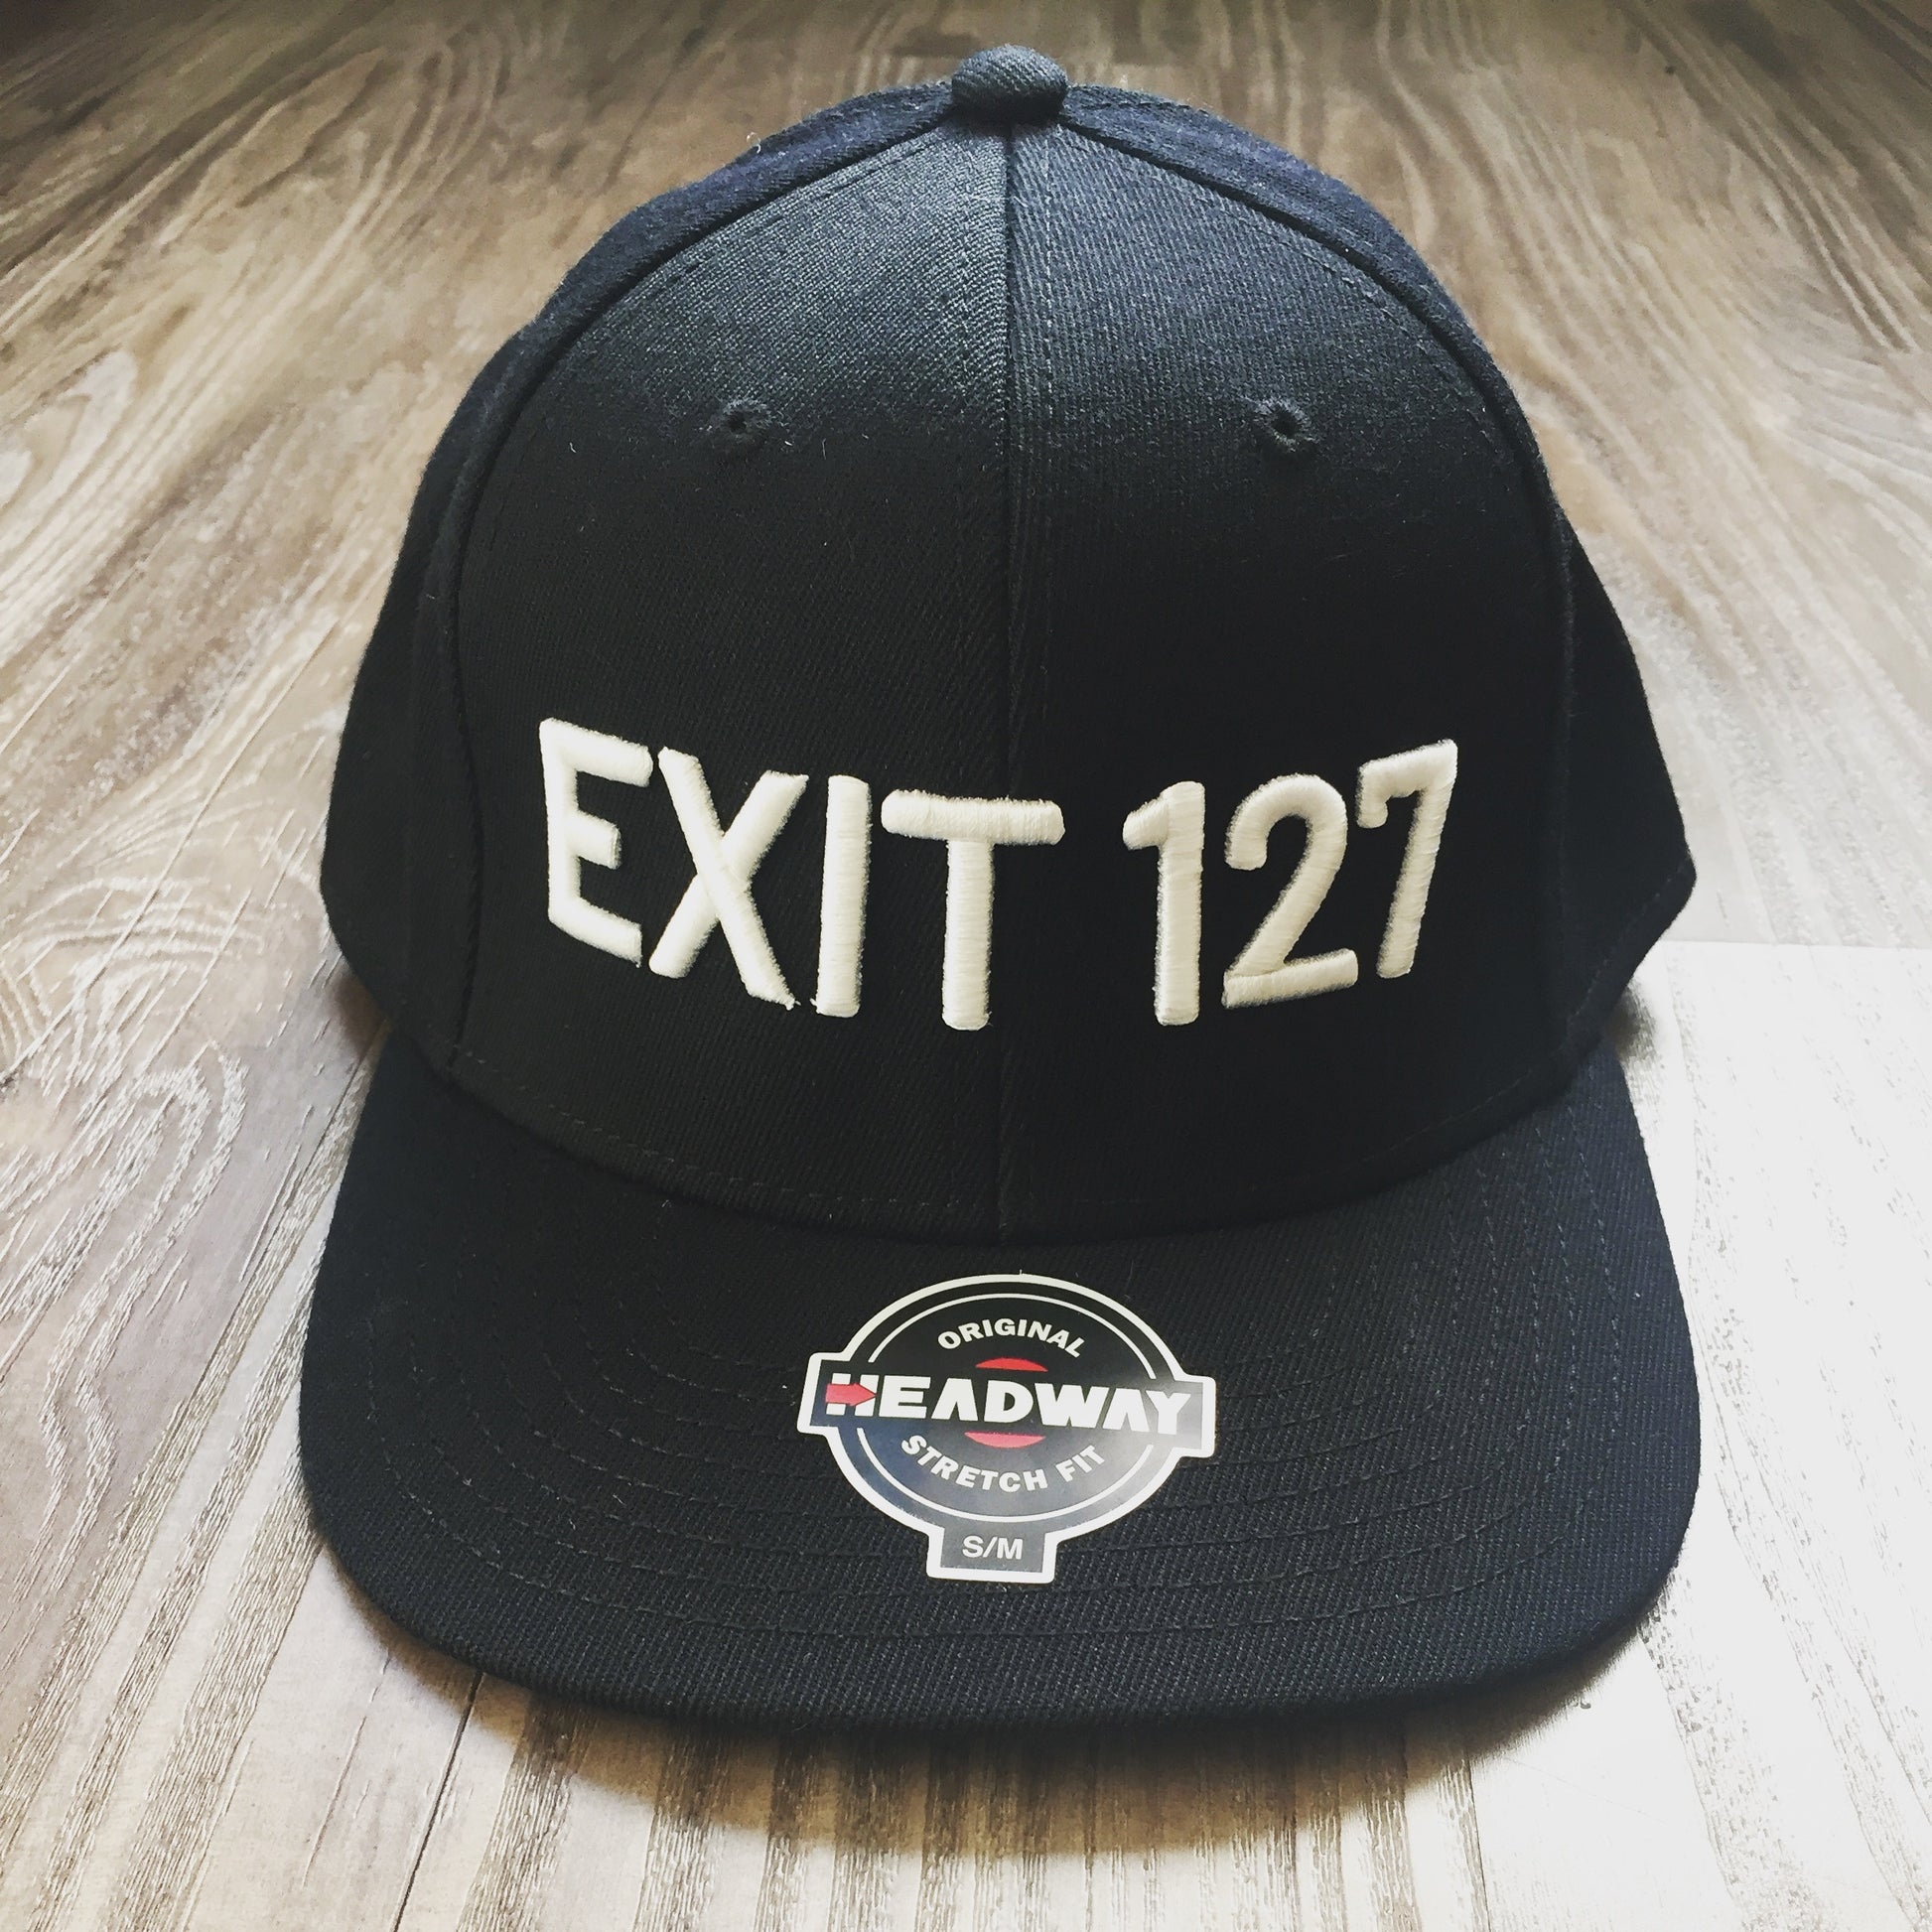 Black fitted cap with "EXIT 127" written on the front of the cap